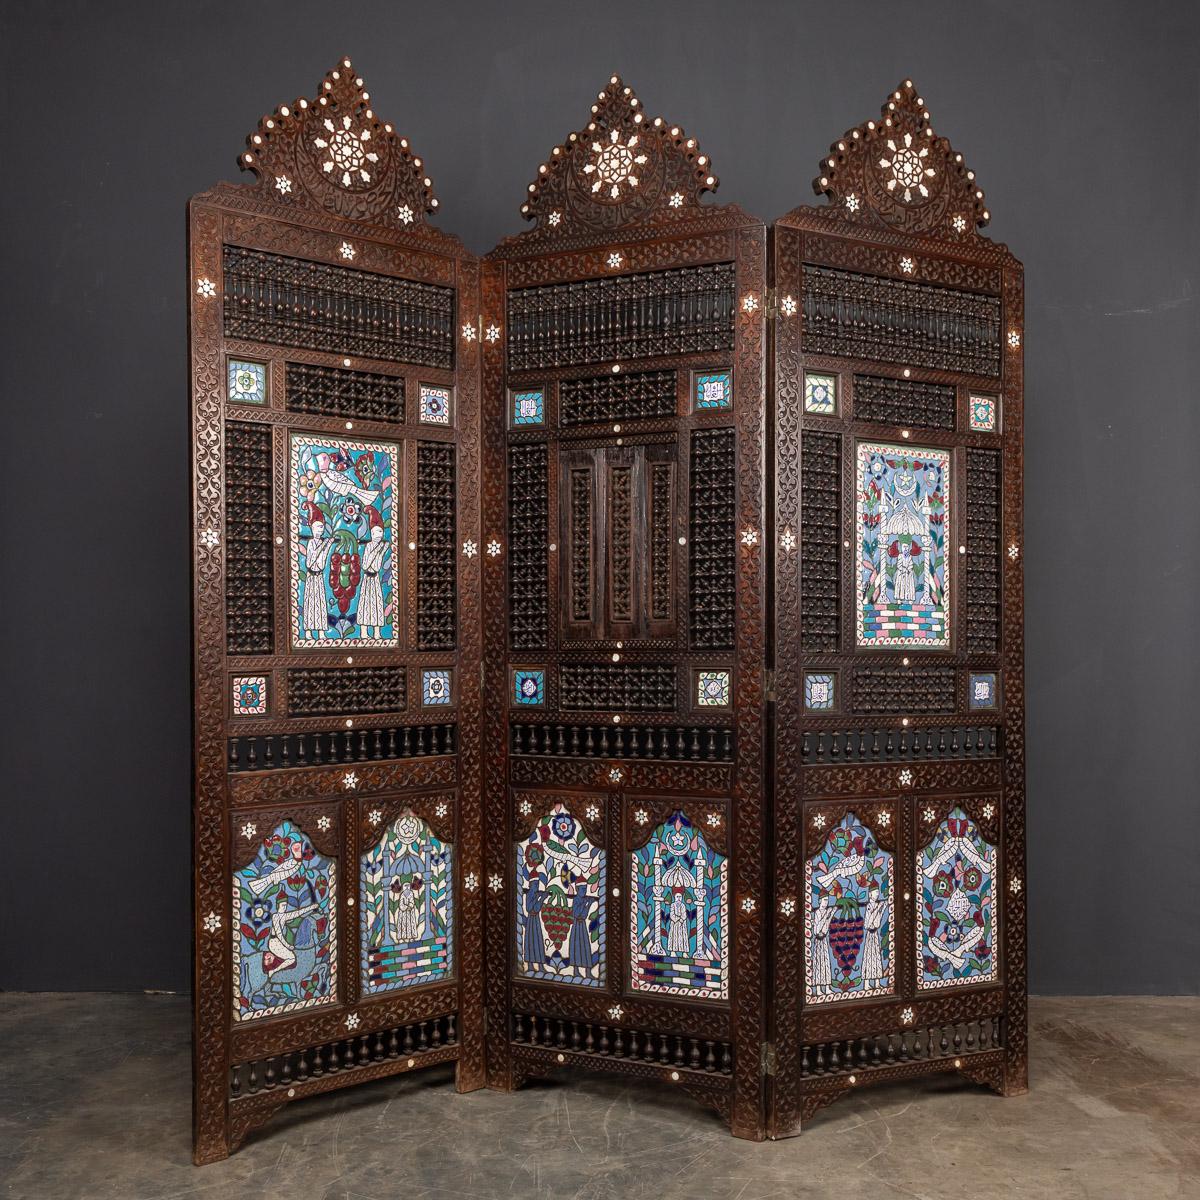 Striking 20th century Middle-Eastern folding screen / room divider. This exquisite screen consists of dark polished wood and mother of pearl inlay and hand painted enamel panels. Perfect for indoor and outdoor use, this is a real conversation piece